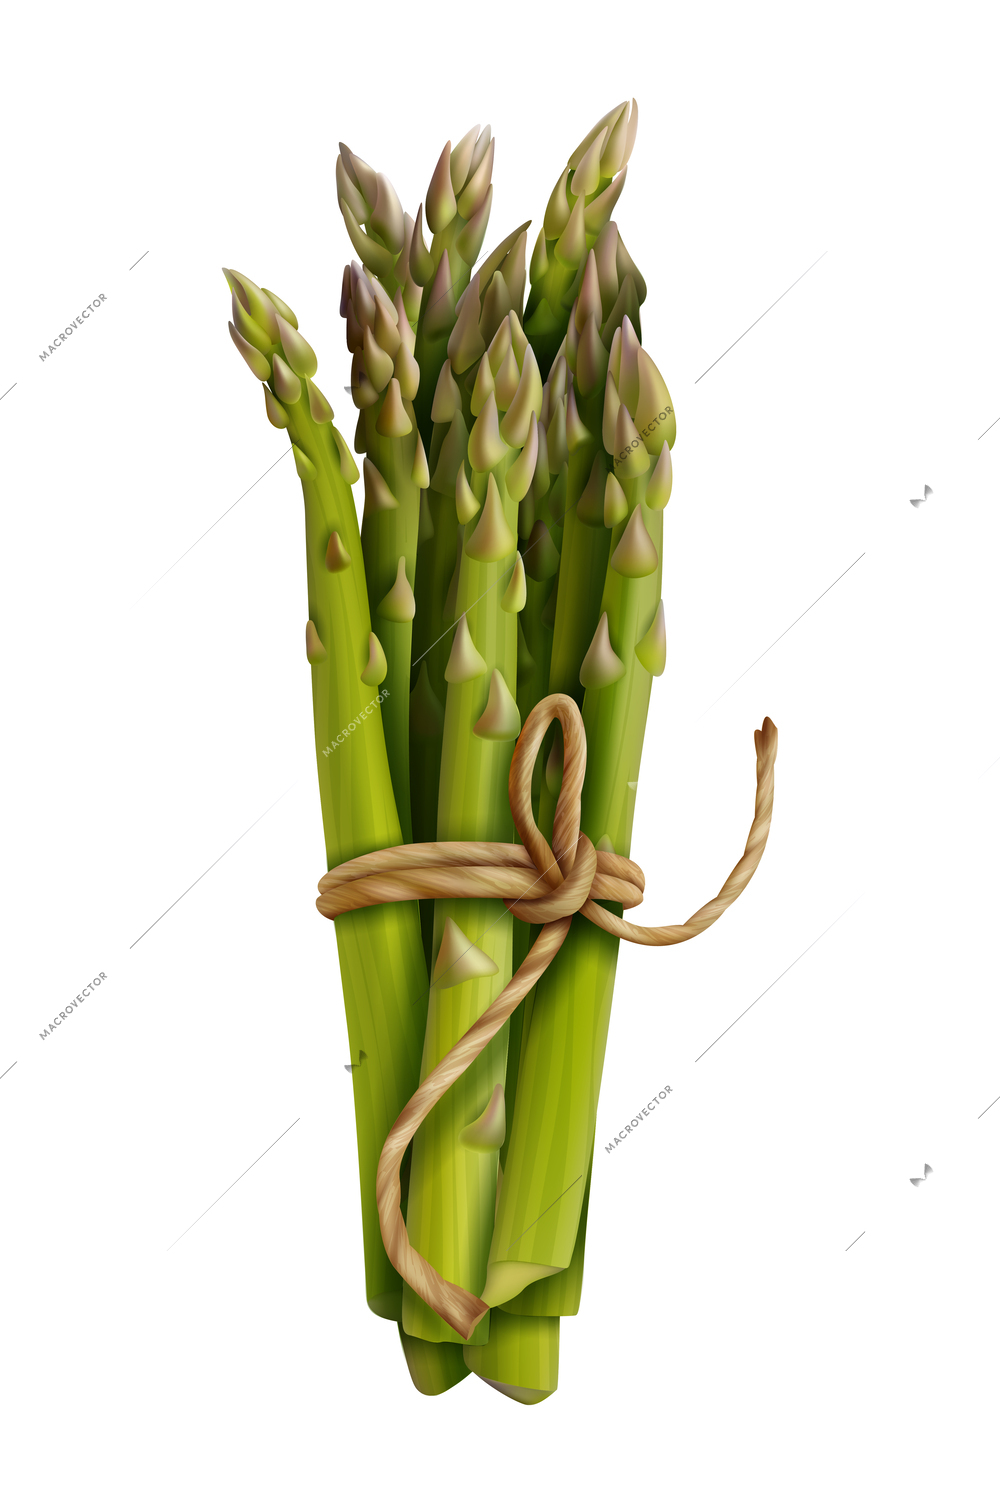 Asparagus spears tied bunch realistic vector illustration